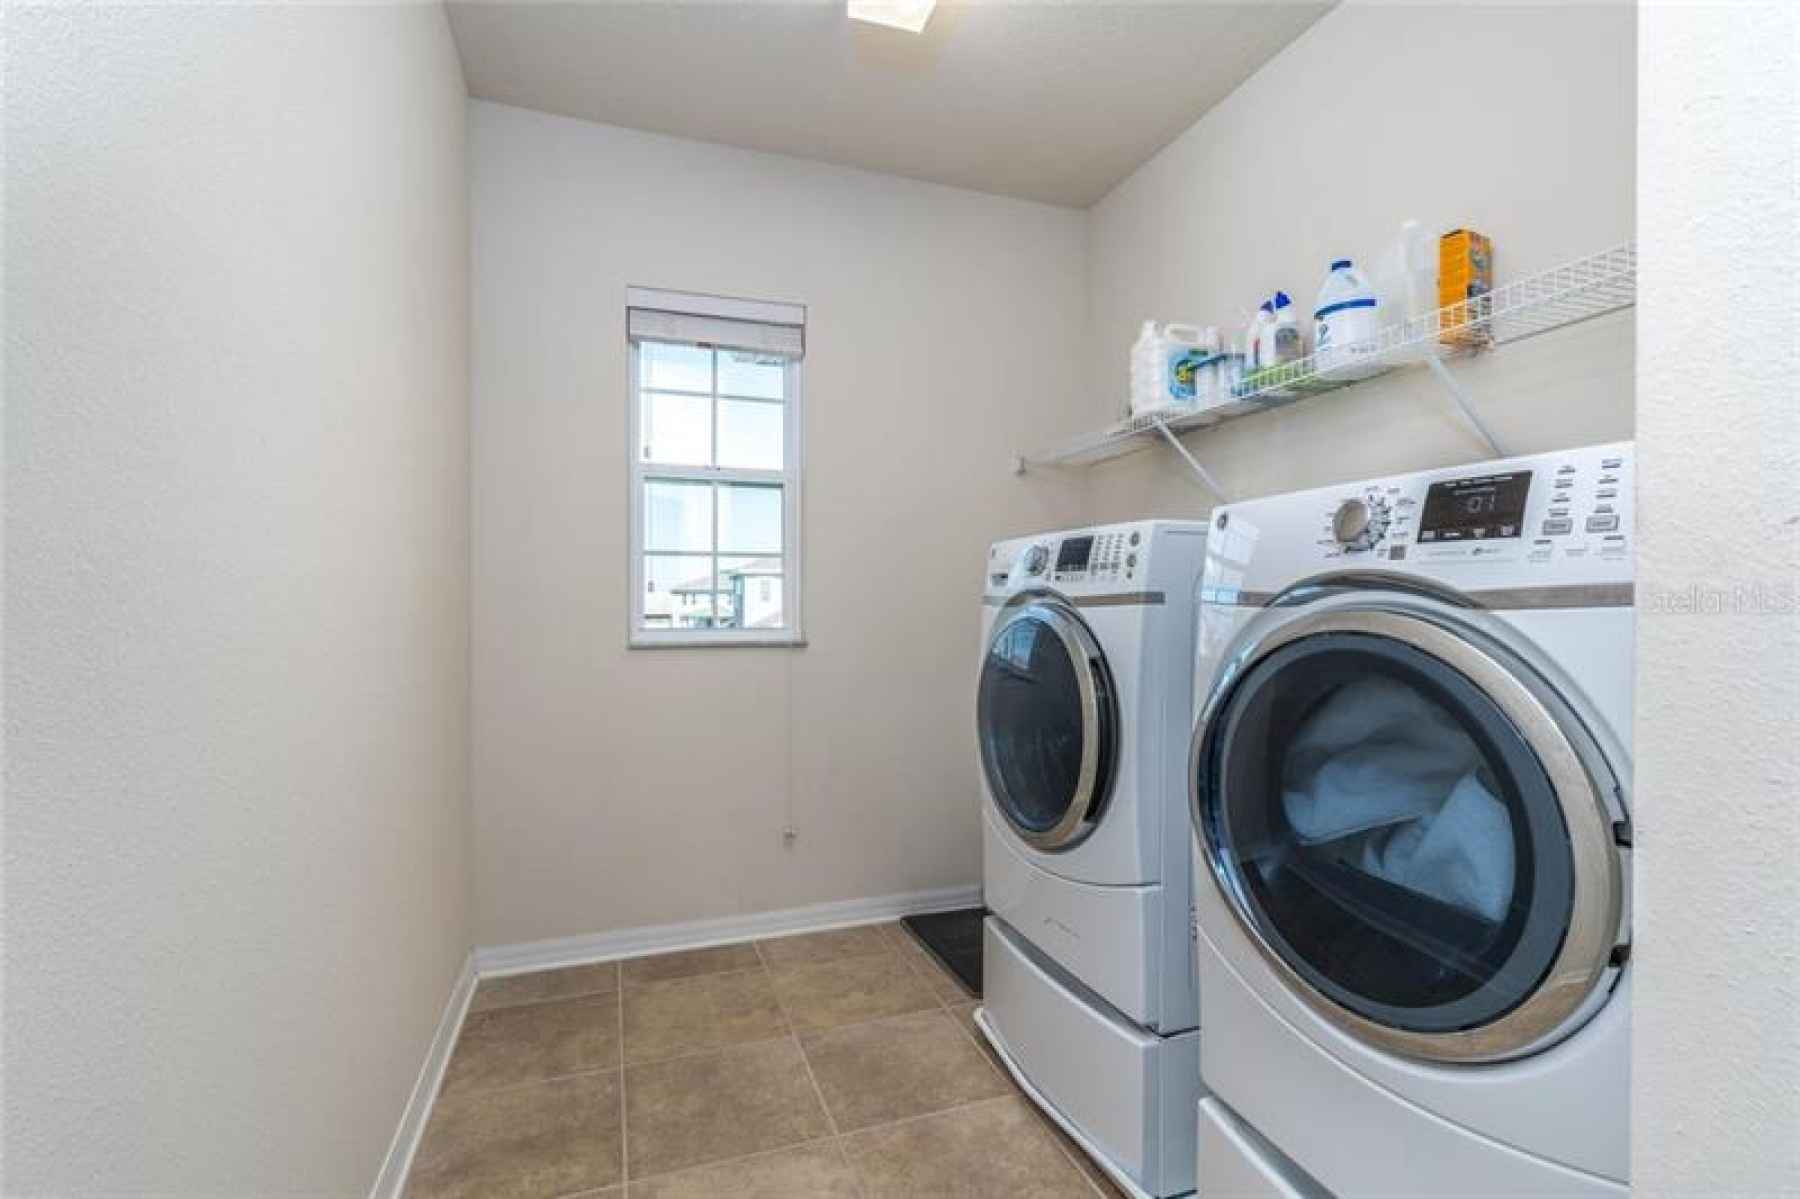 Laundry Room In Upstairs Loft